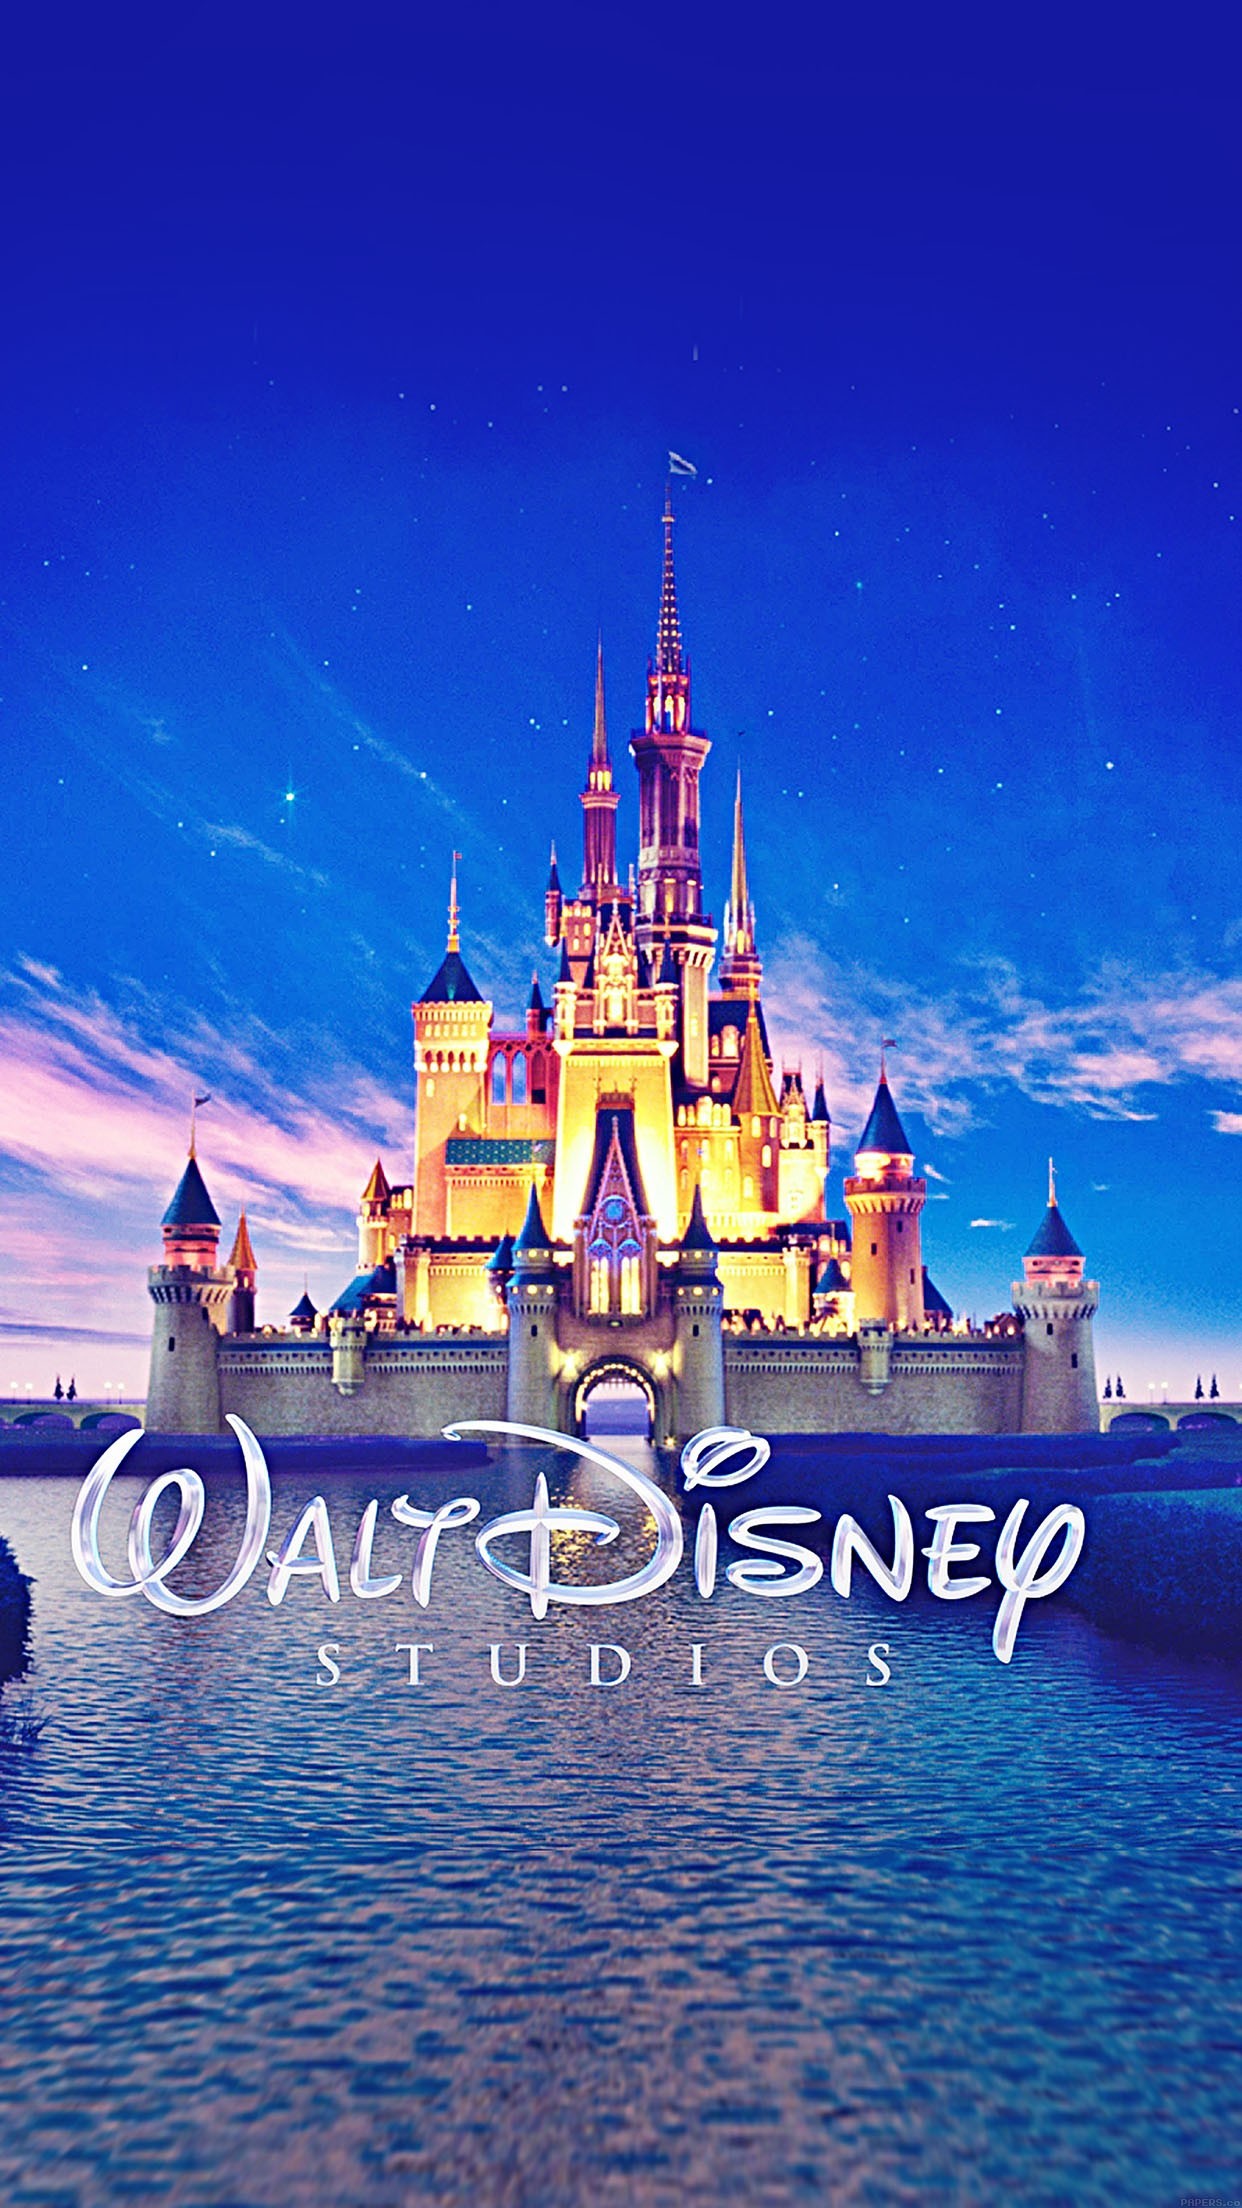 Disney chateau 3Wallpapers iPhone Parallax